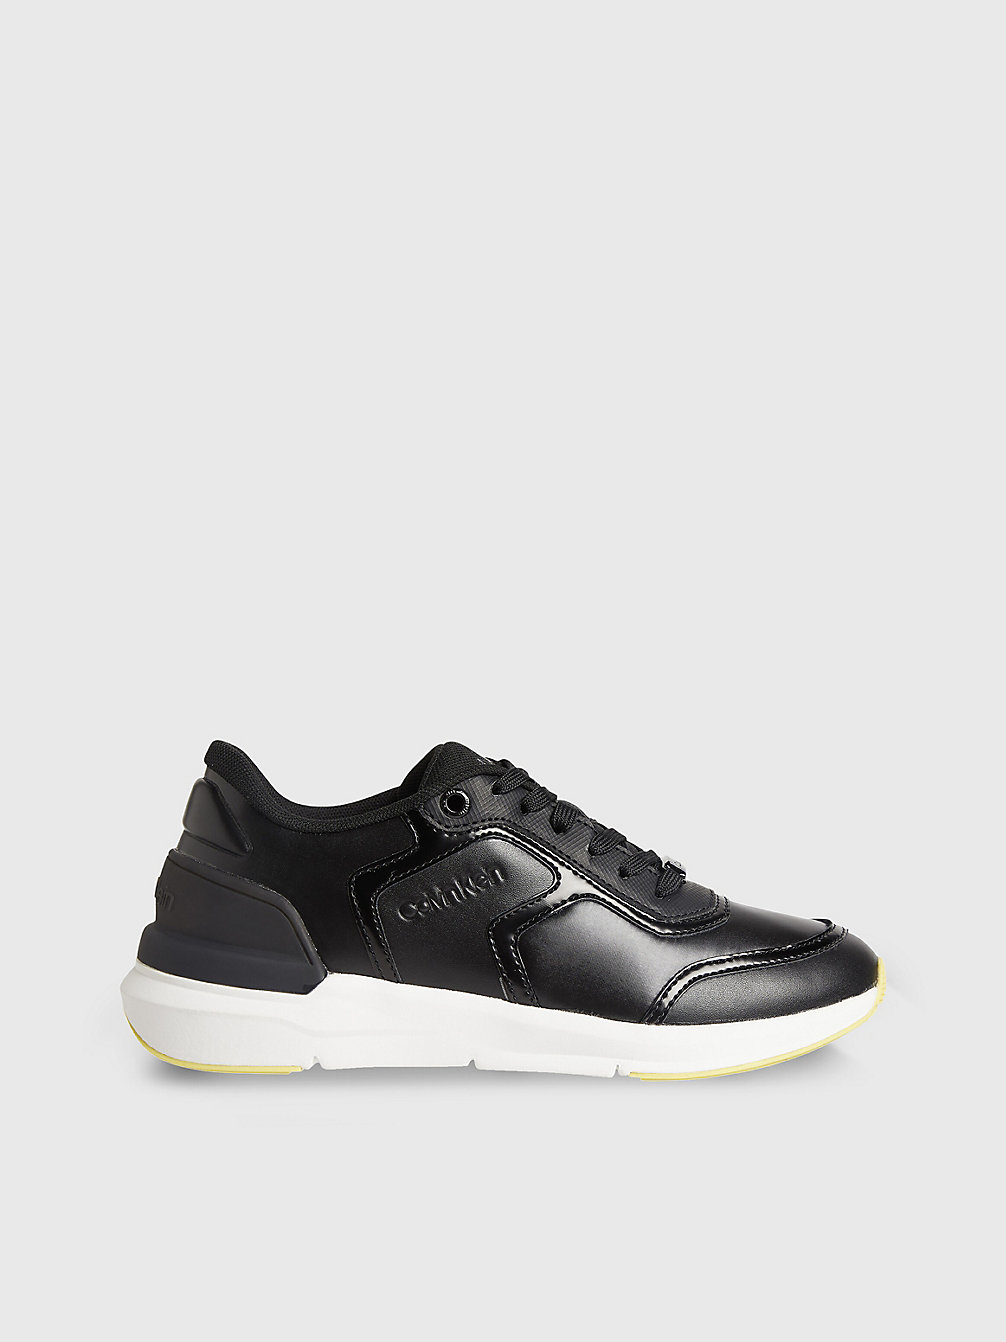 CK BLACK Recycled Faux Leather Trainers undefined women Calvin Klein